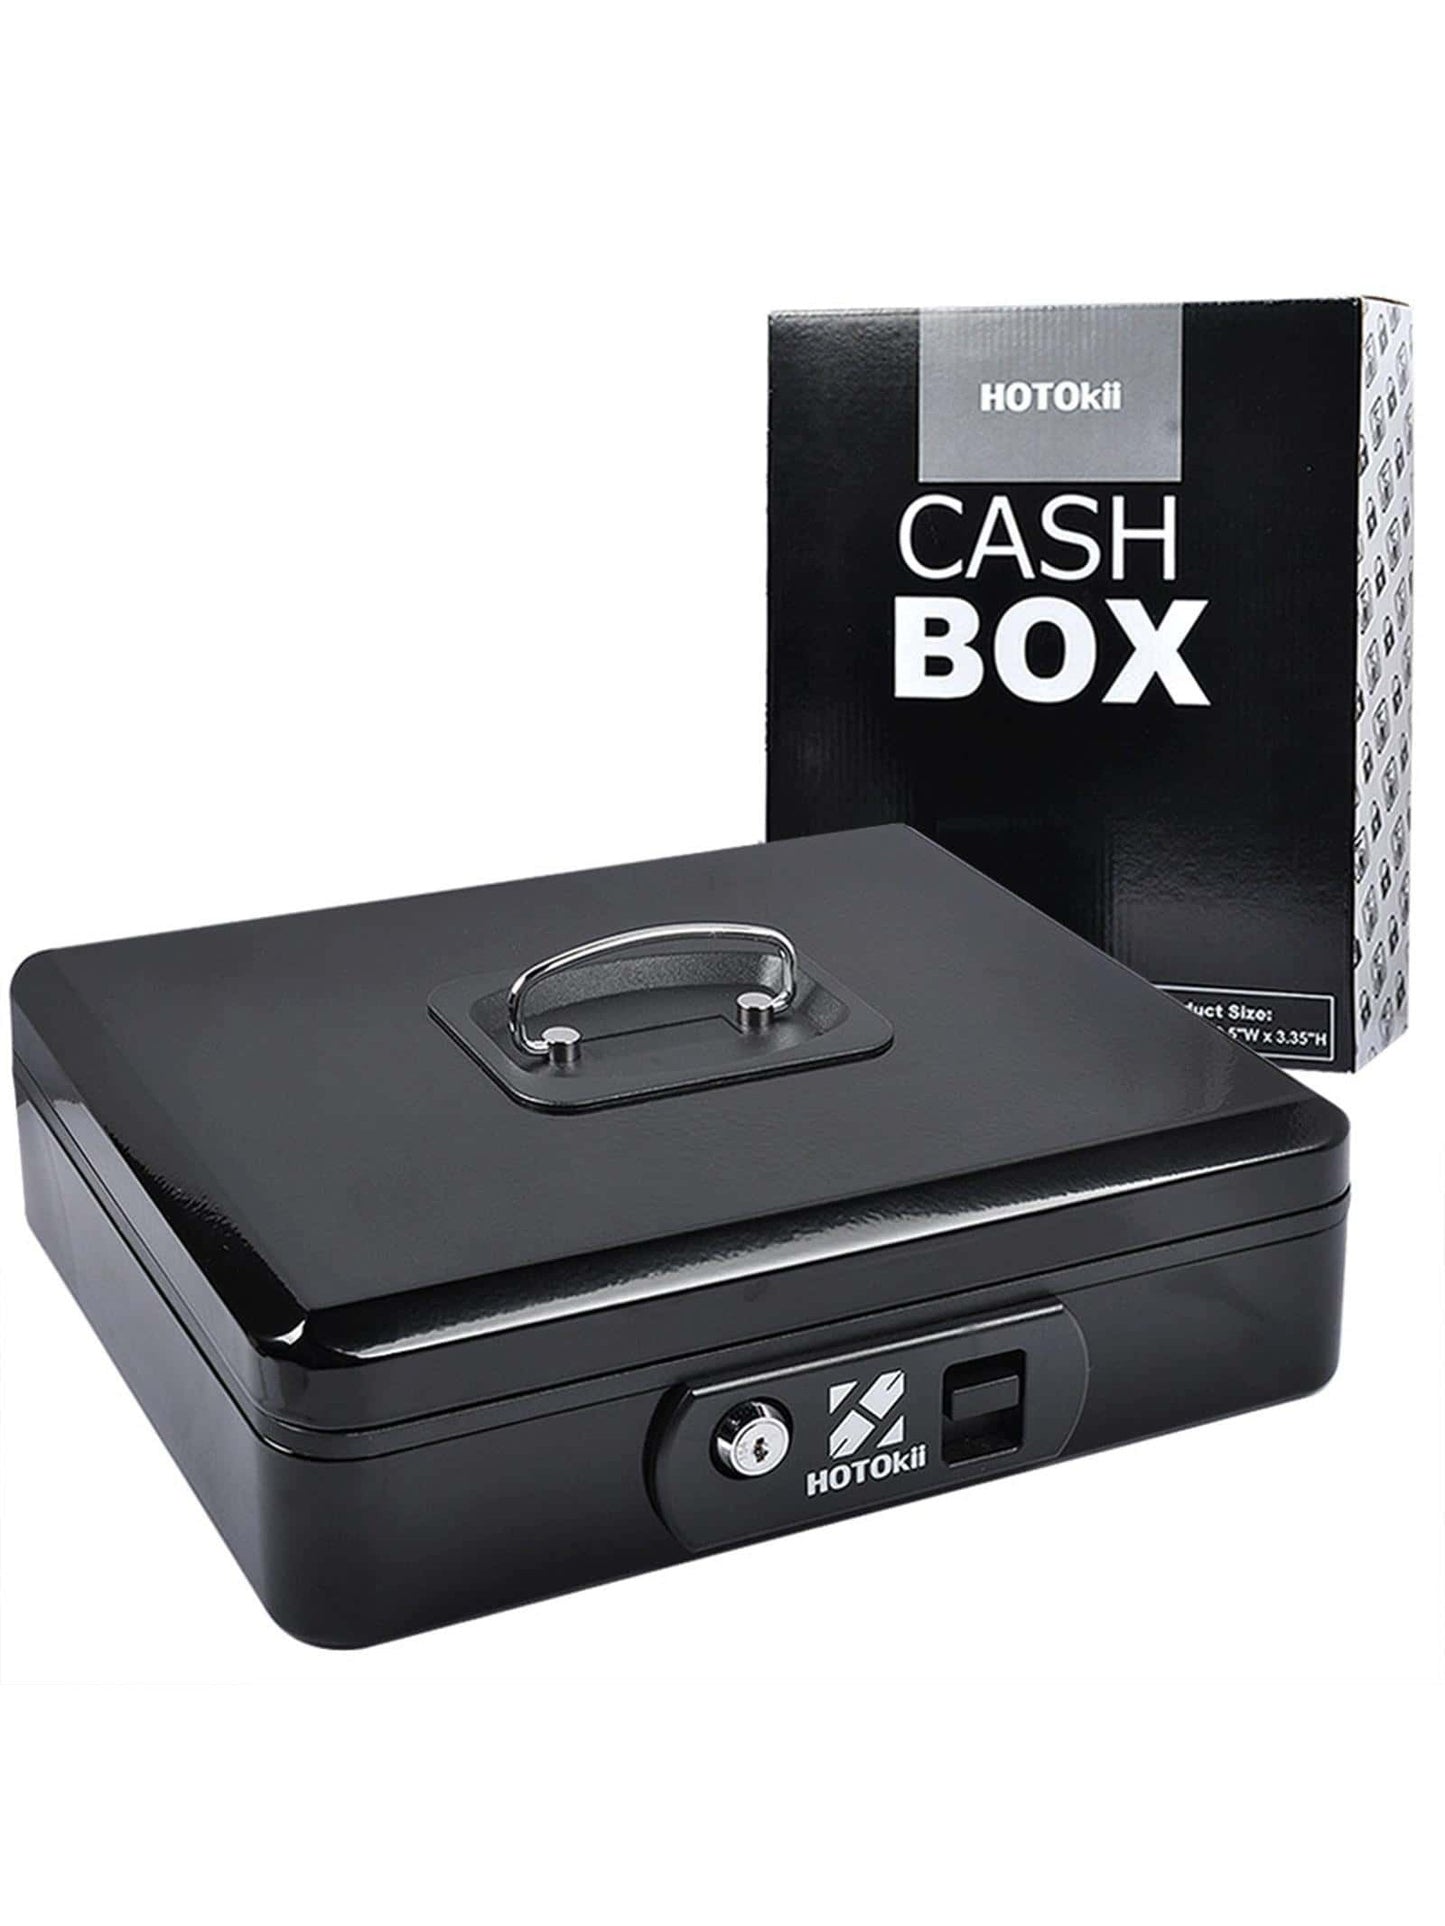 Durable Fireproof Safe Box with Key Lock, Secure Money Tray, and Cash Storage - 11.8" x 9.5" x 3.35" Ideal for All Ages